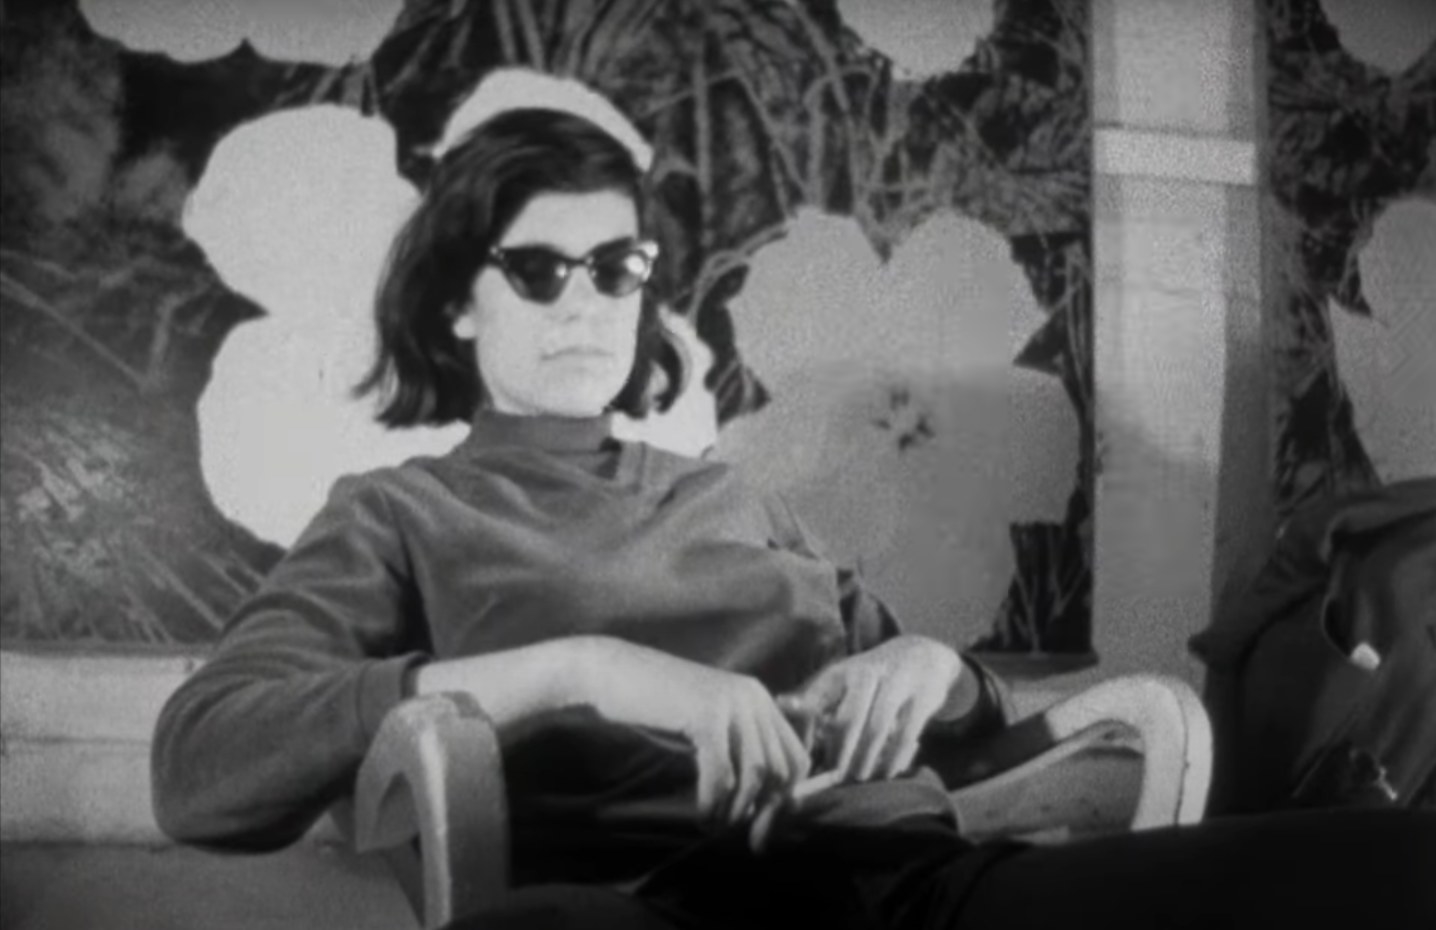 A woman sits in a chair with sunglasses on